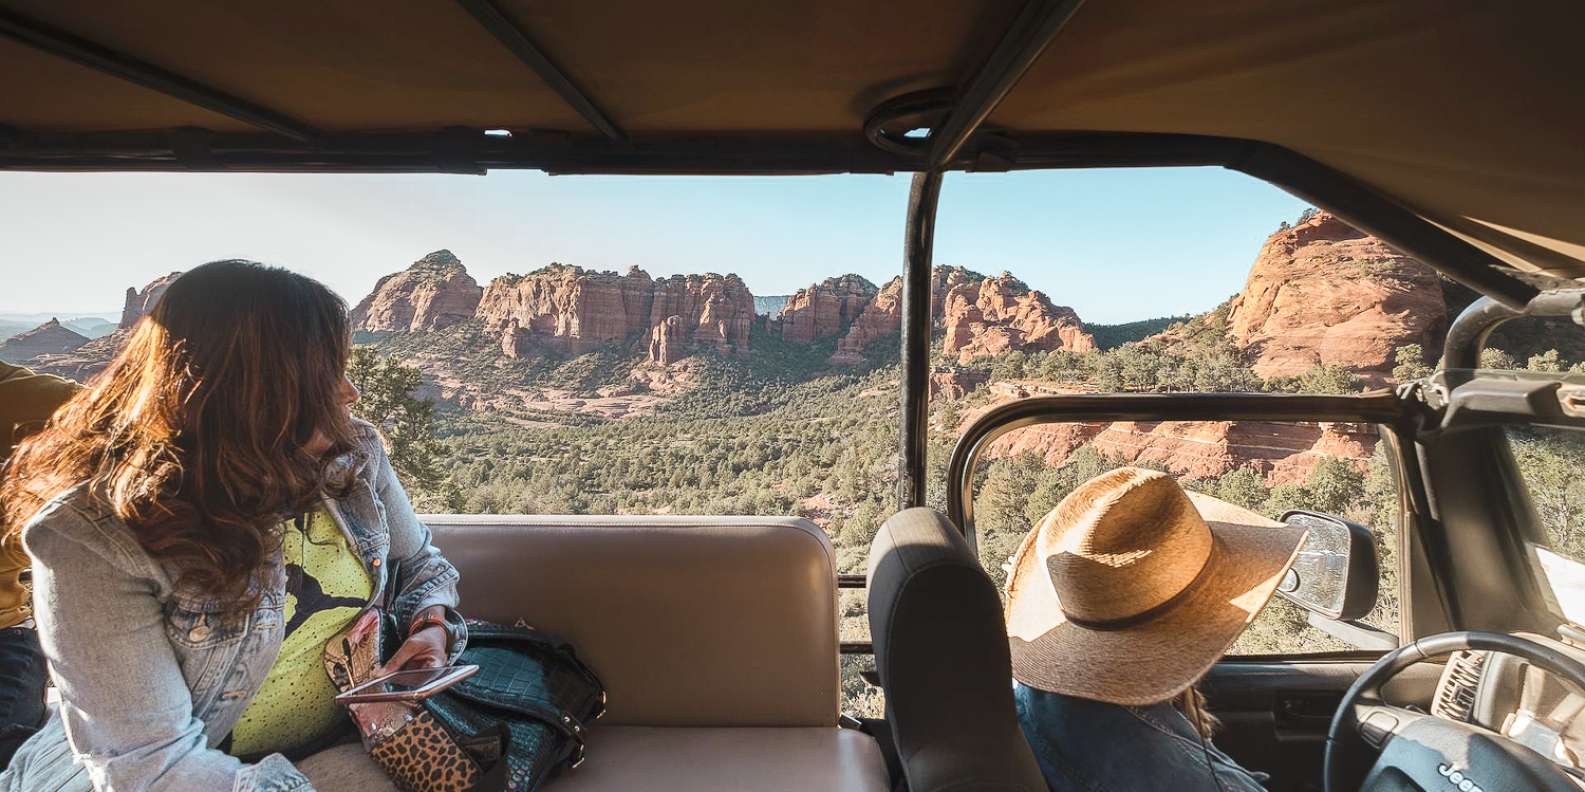 What to do in Sedona